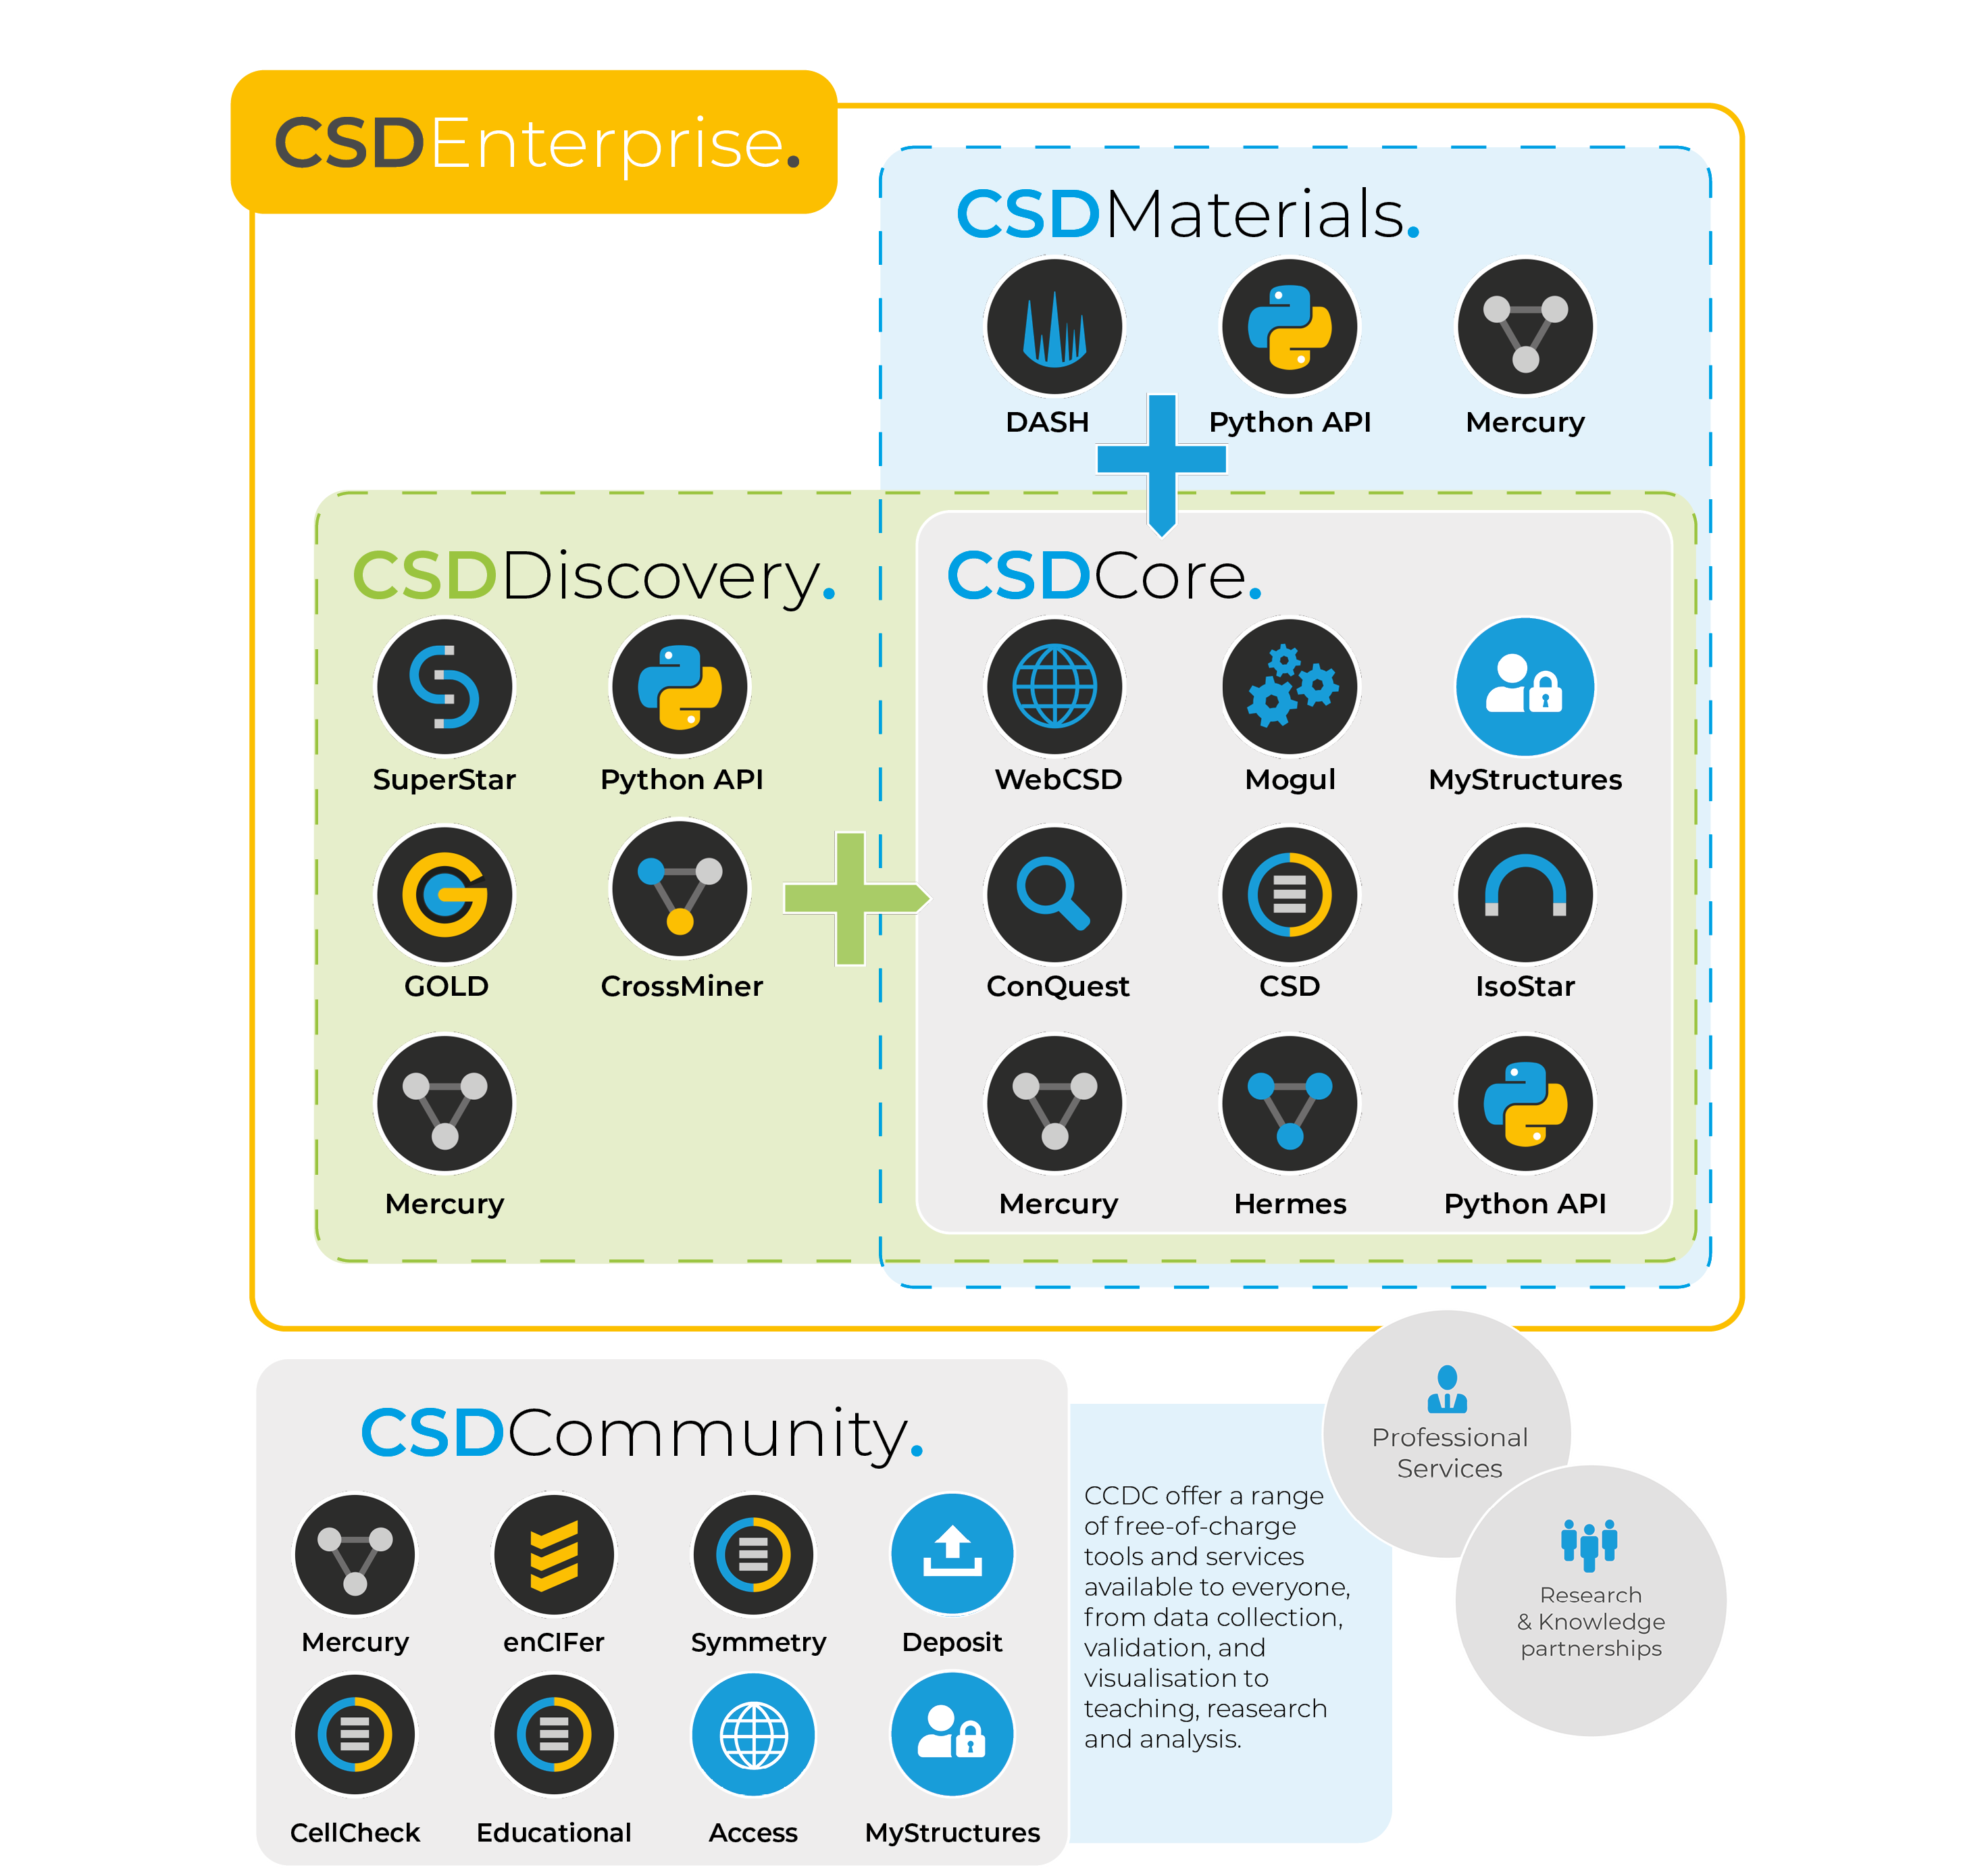 Overview of the CSD Software Portfolio, including CSD-Core at the heart